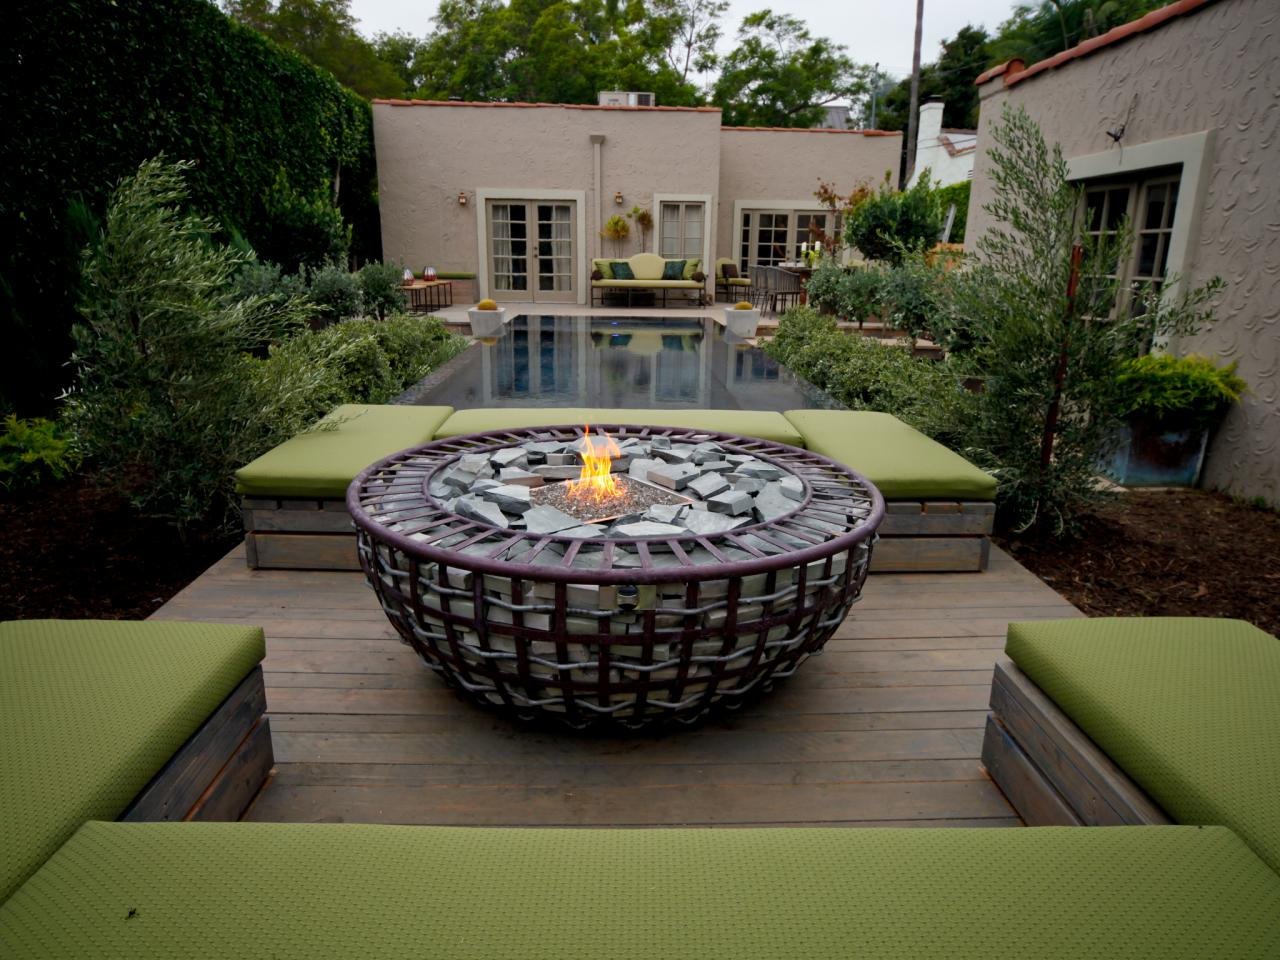 10 Most Popular Fire Pit On Deck Ideas %name 2022